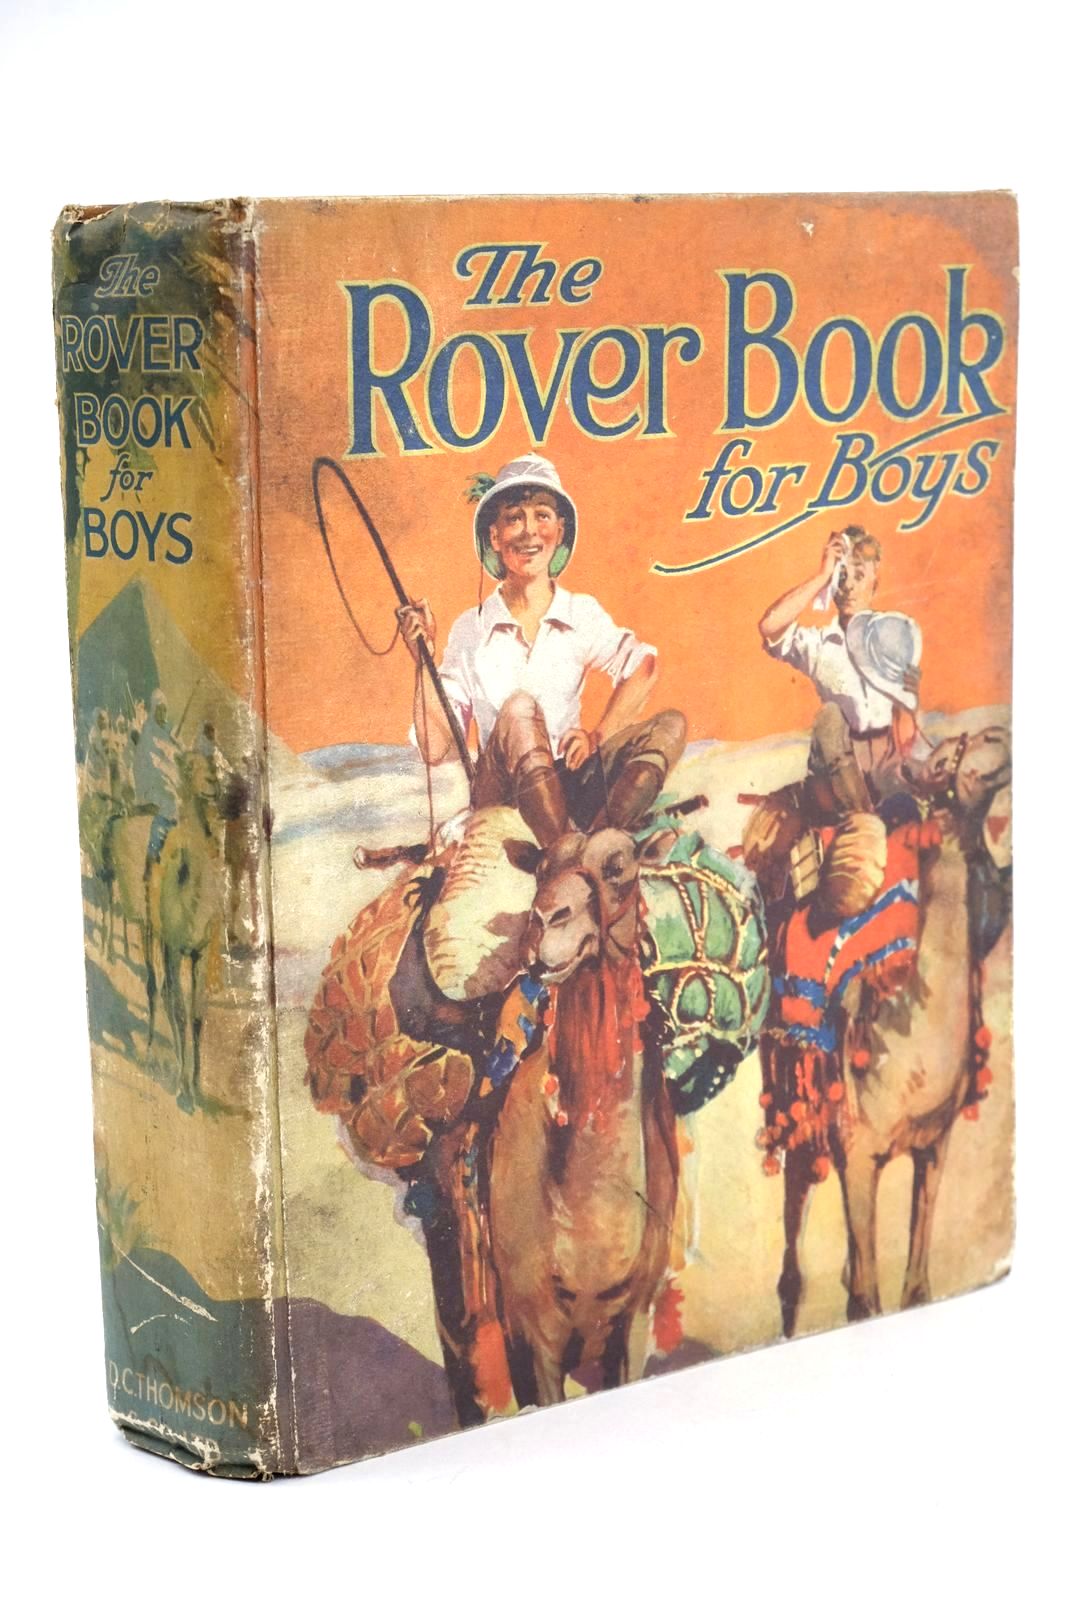 Photo of THE ROVER BOOK FOR BOYS 1929 written by Garden, R.L. Mitchell, Randolph Ballantine, Jack et al, illustrated by Various, published by D.C. Thomson &amp; Co Ltd. (STOCK CODE: 1324787)  for sale by Stella & Rose's Books